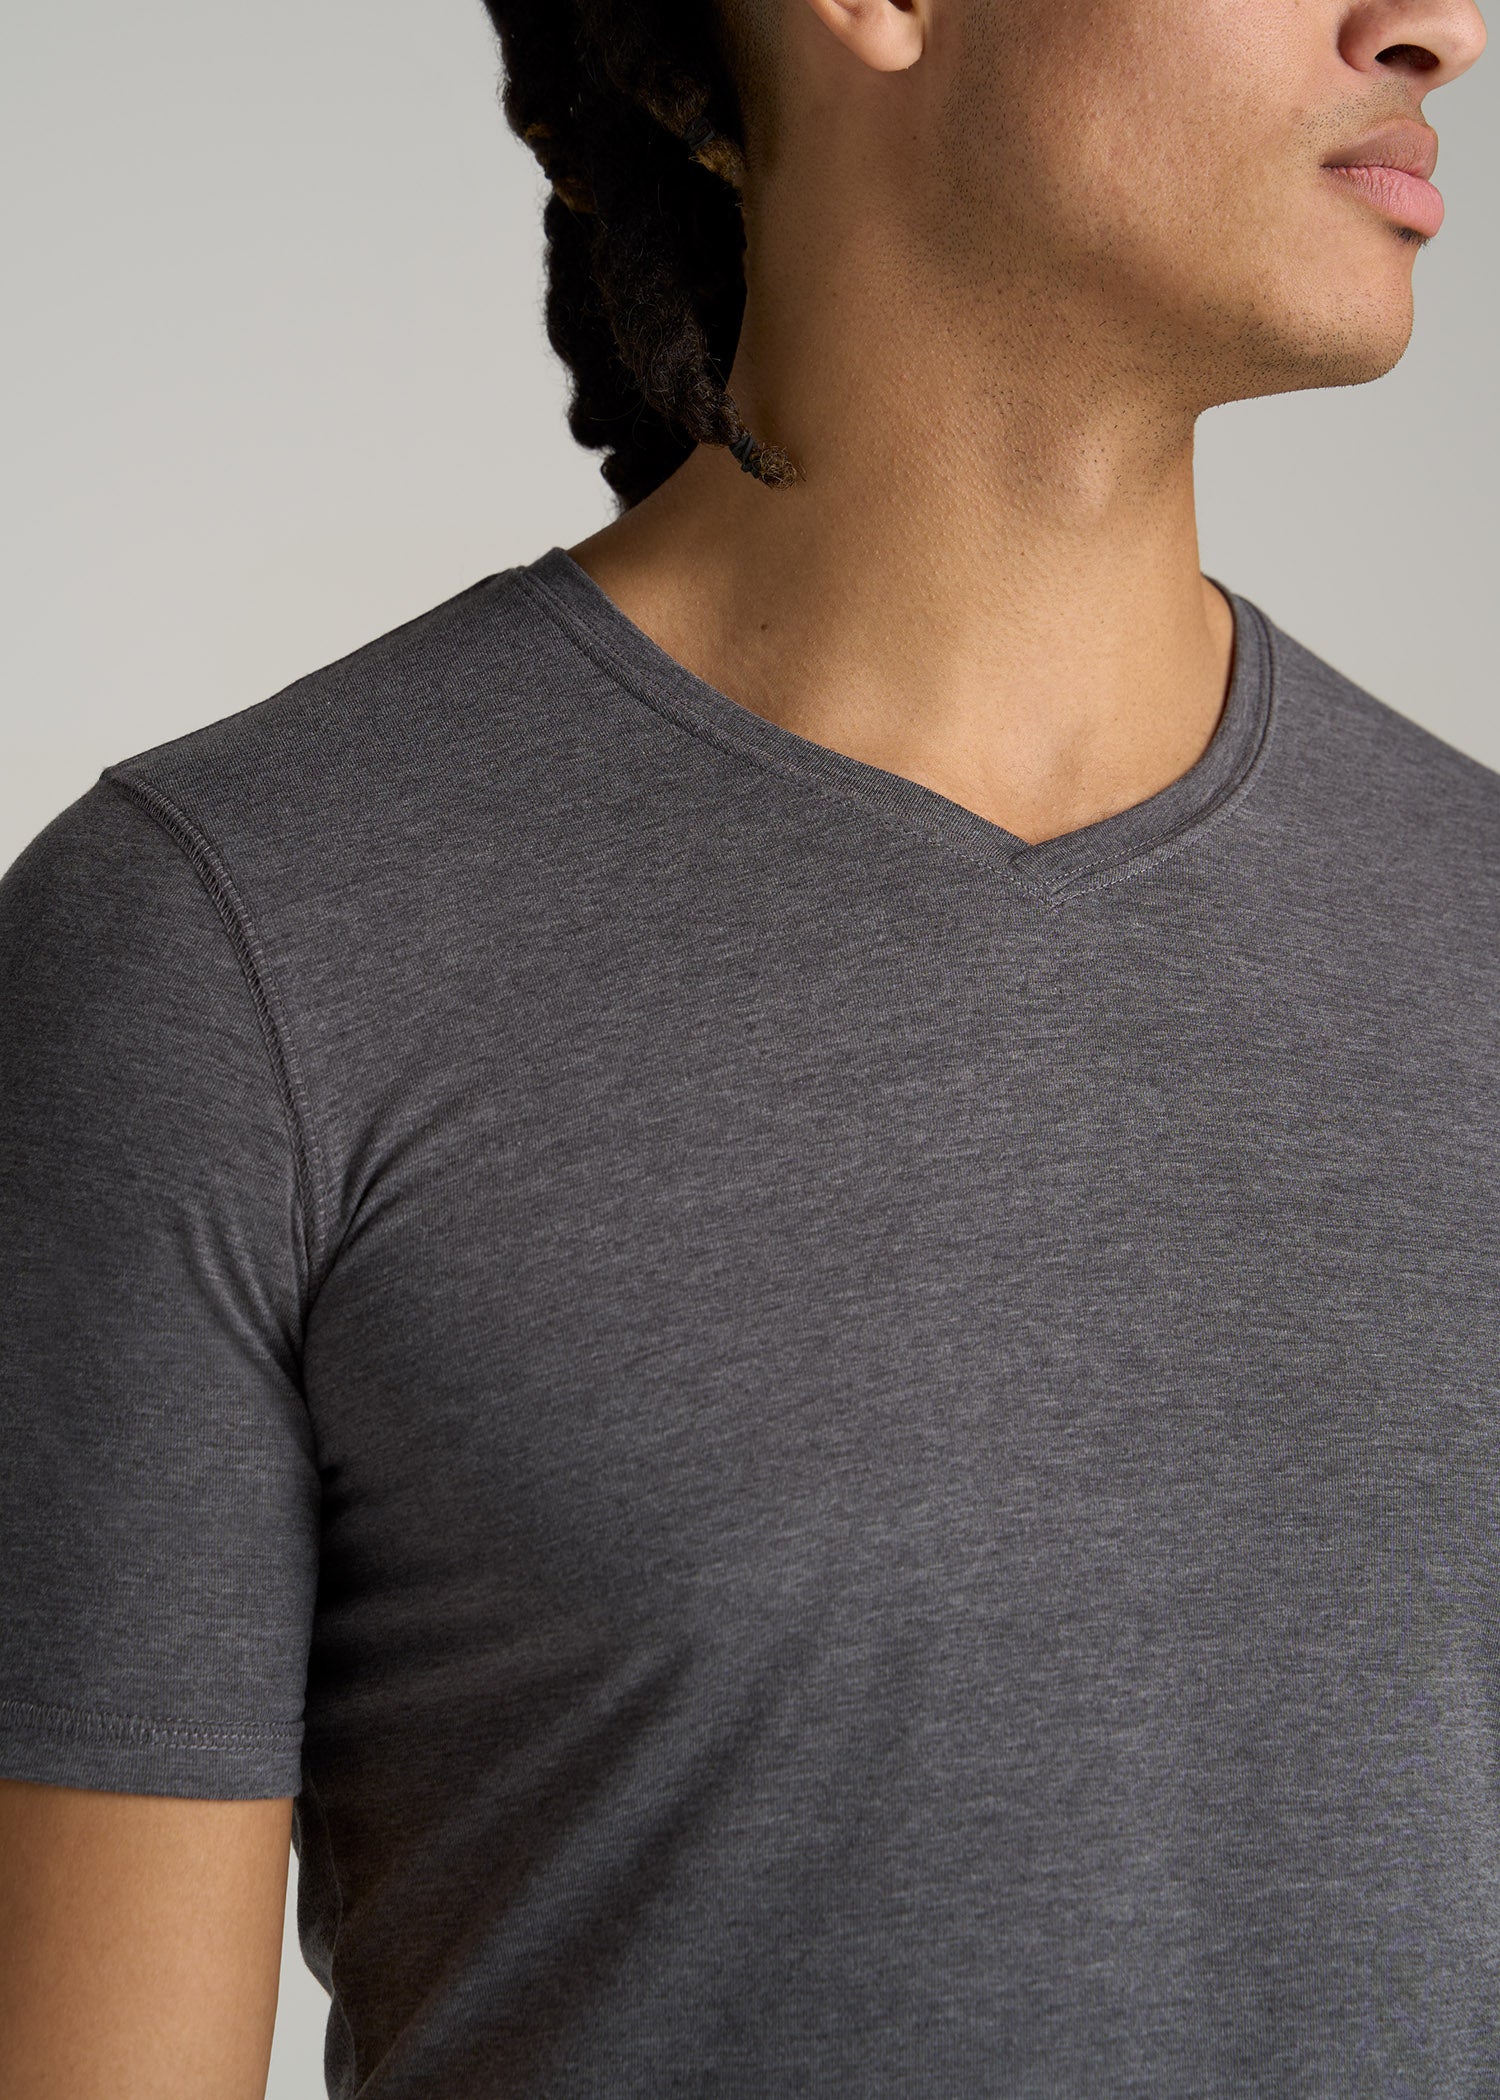    American-Tall-Men-Essential-SLIM-FIT-V-Neck-Tees-Charocal-Mix-detail